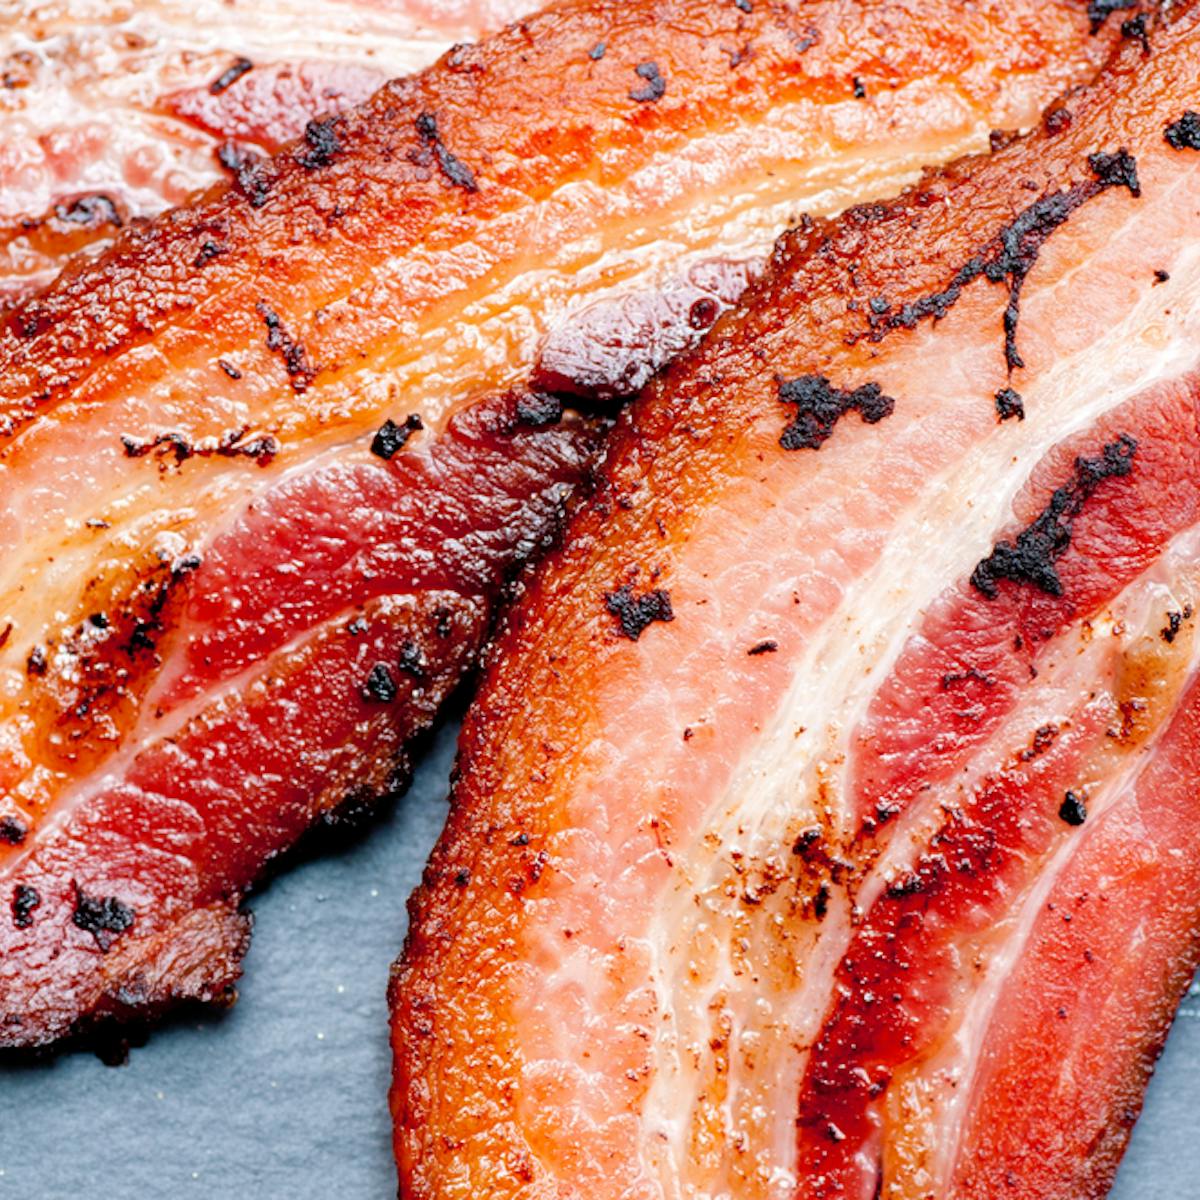 Not all processed meats carry same cancer risk